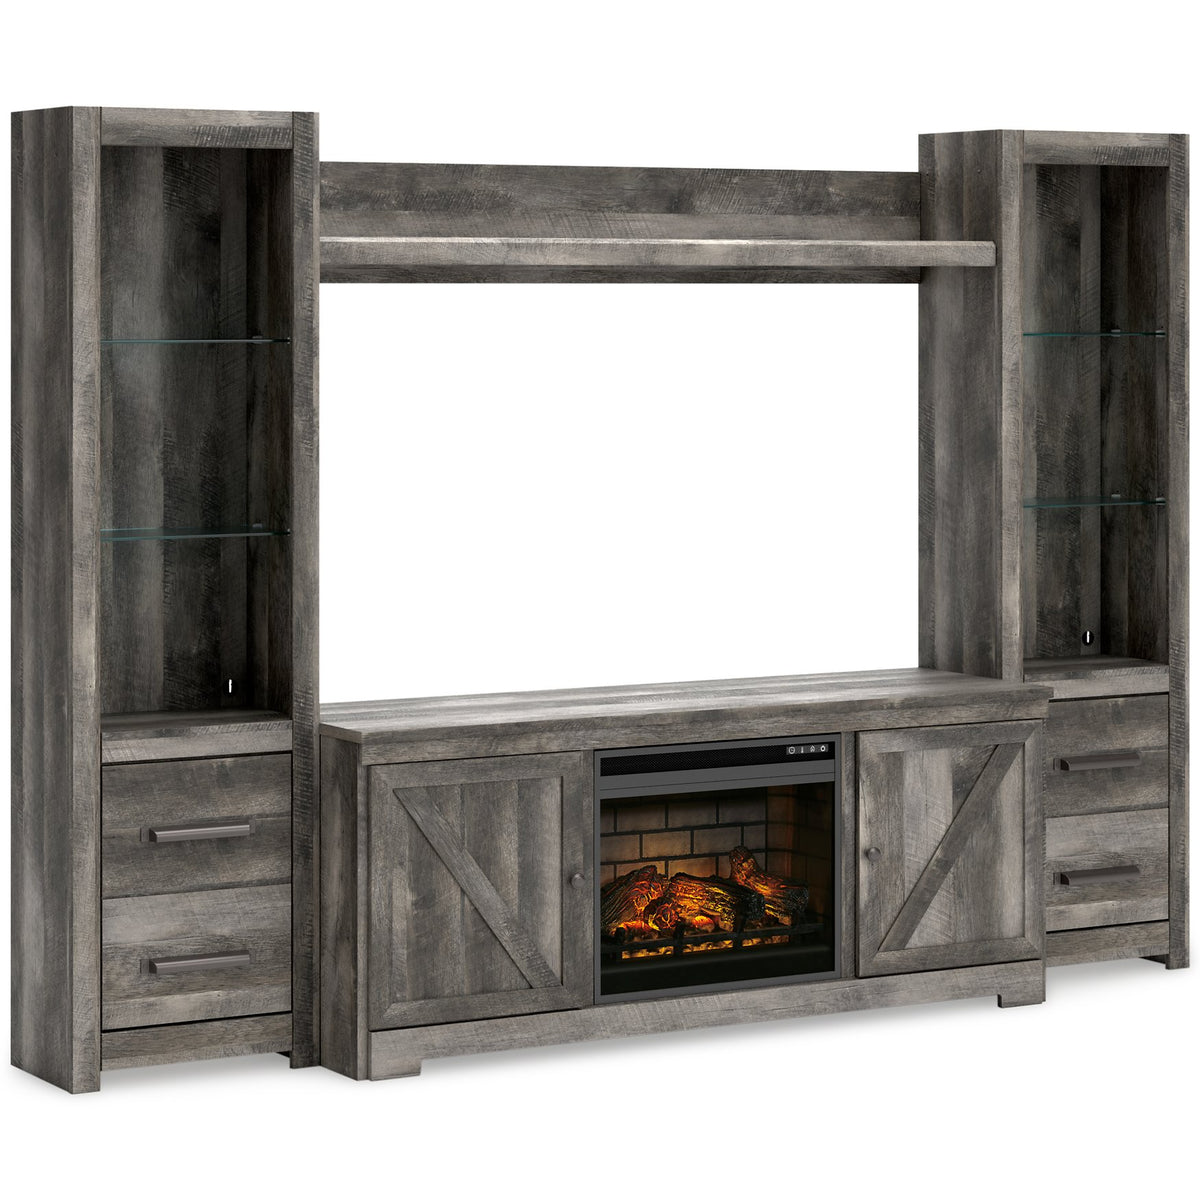 Wynnlow 4-Piece Entertainment Center with Electric Fireplace  Half Price Furniture